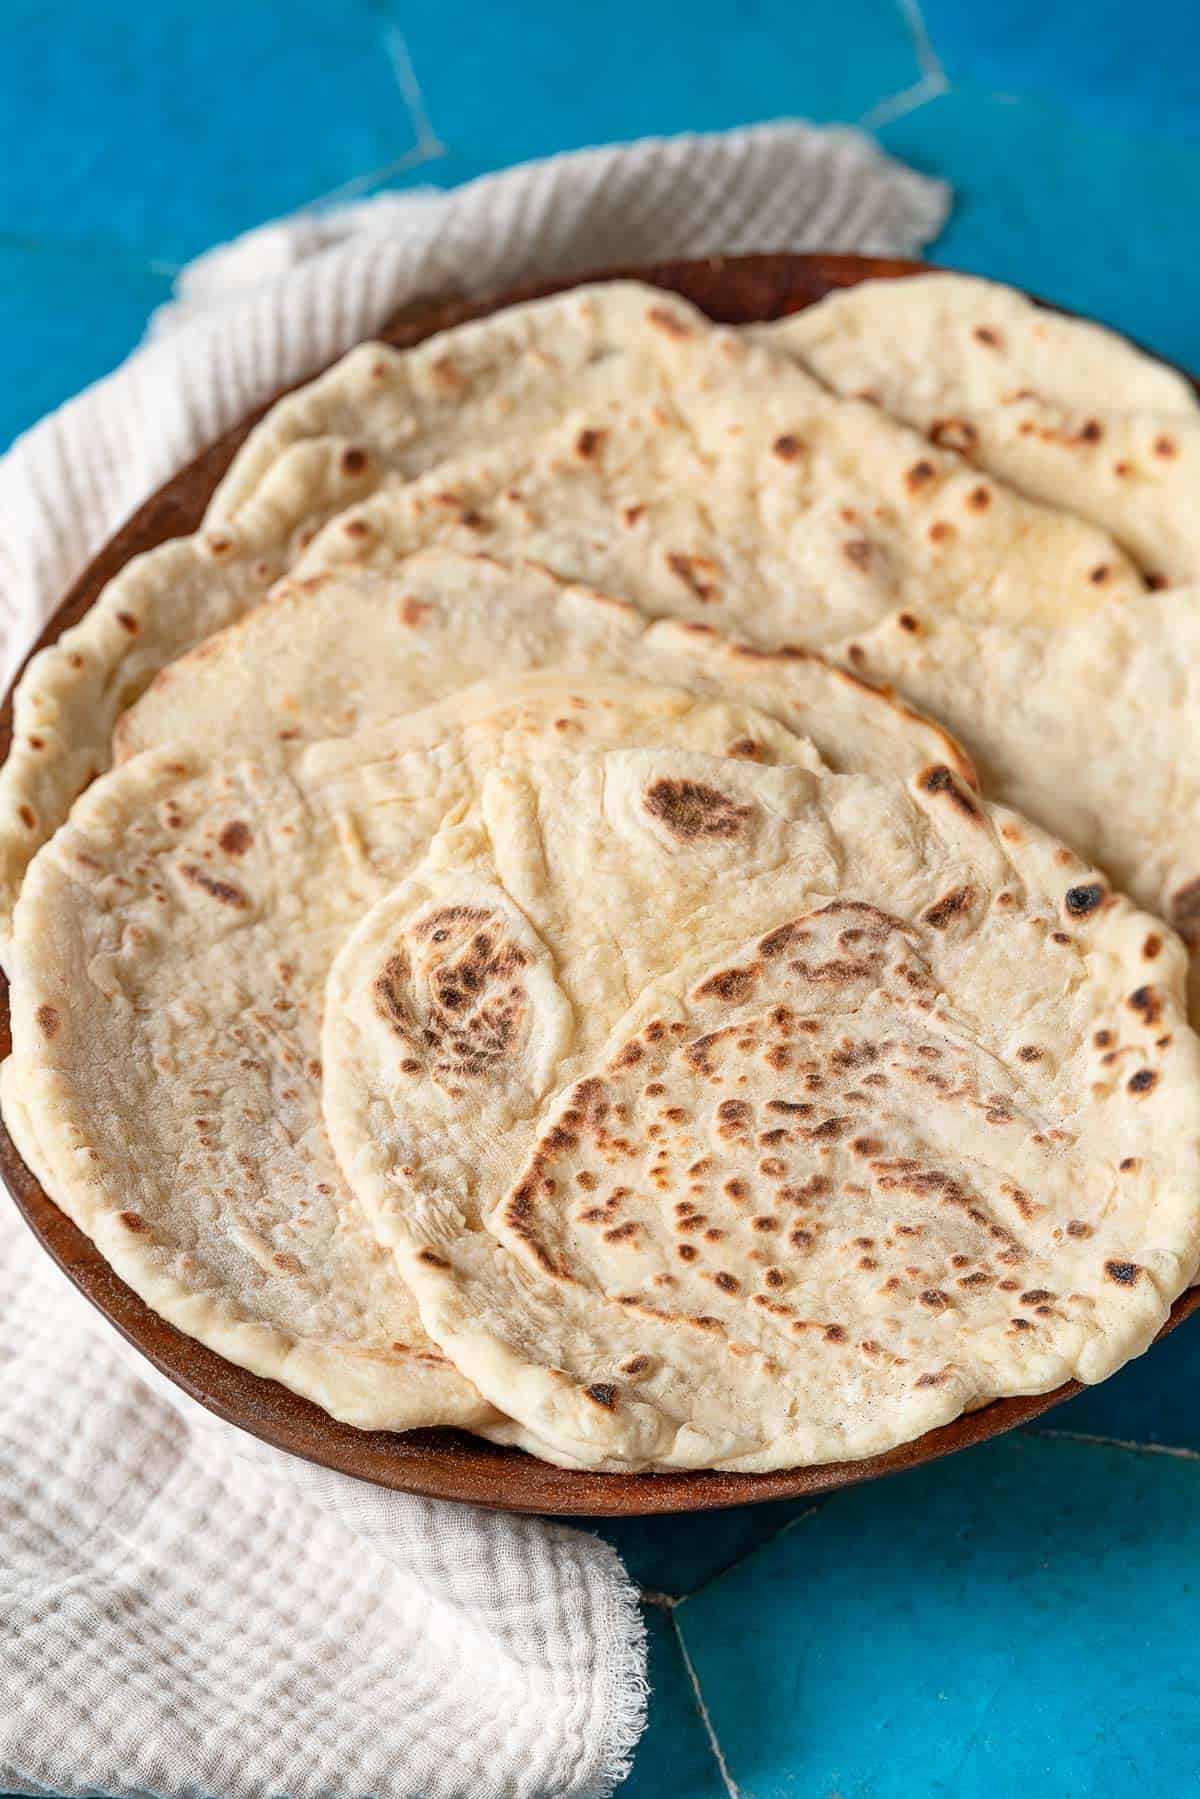 four lavash breads stacked in a brown bowl with a white linen cloth on the side.